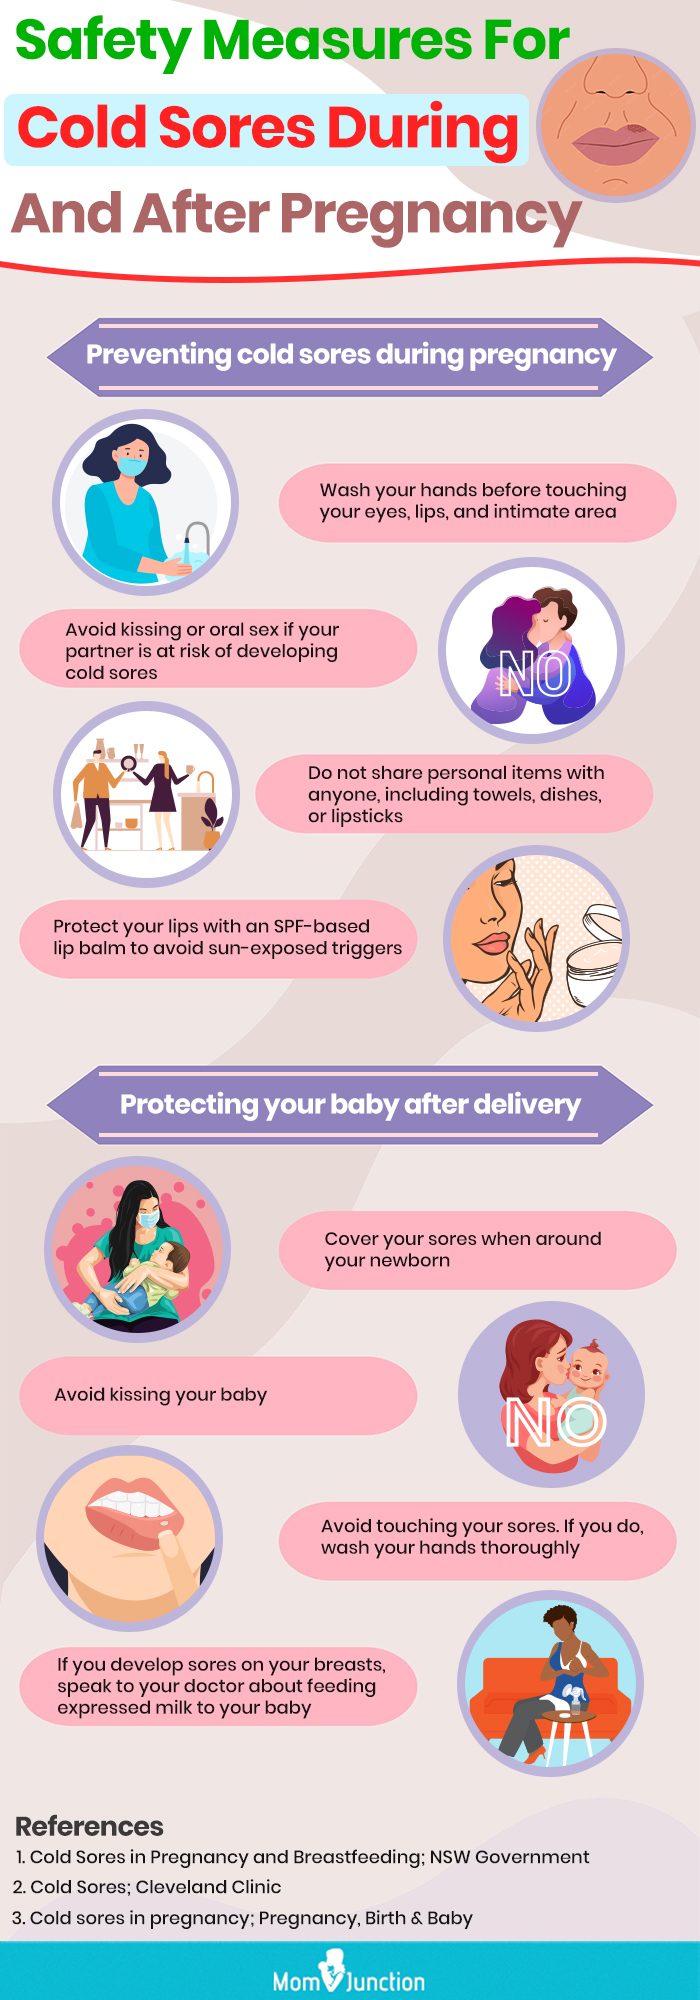 cold sores during and after pregnancy [infographic]